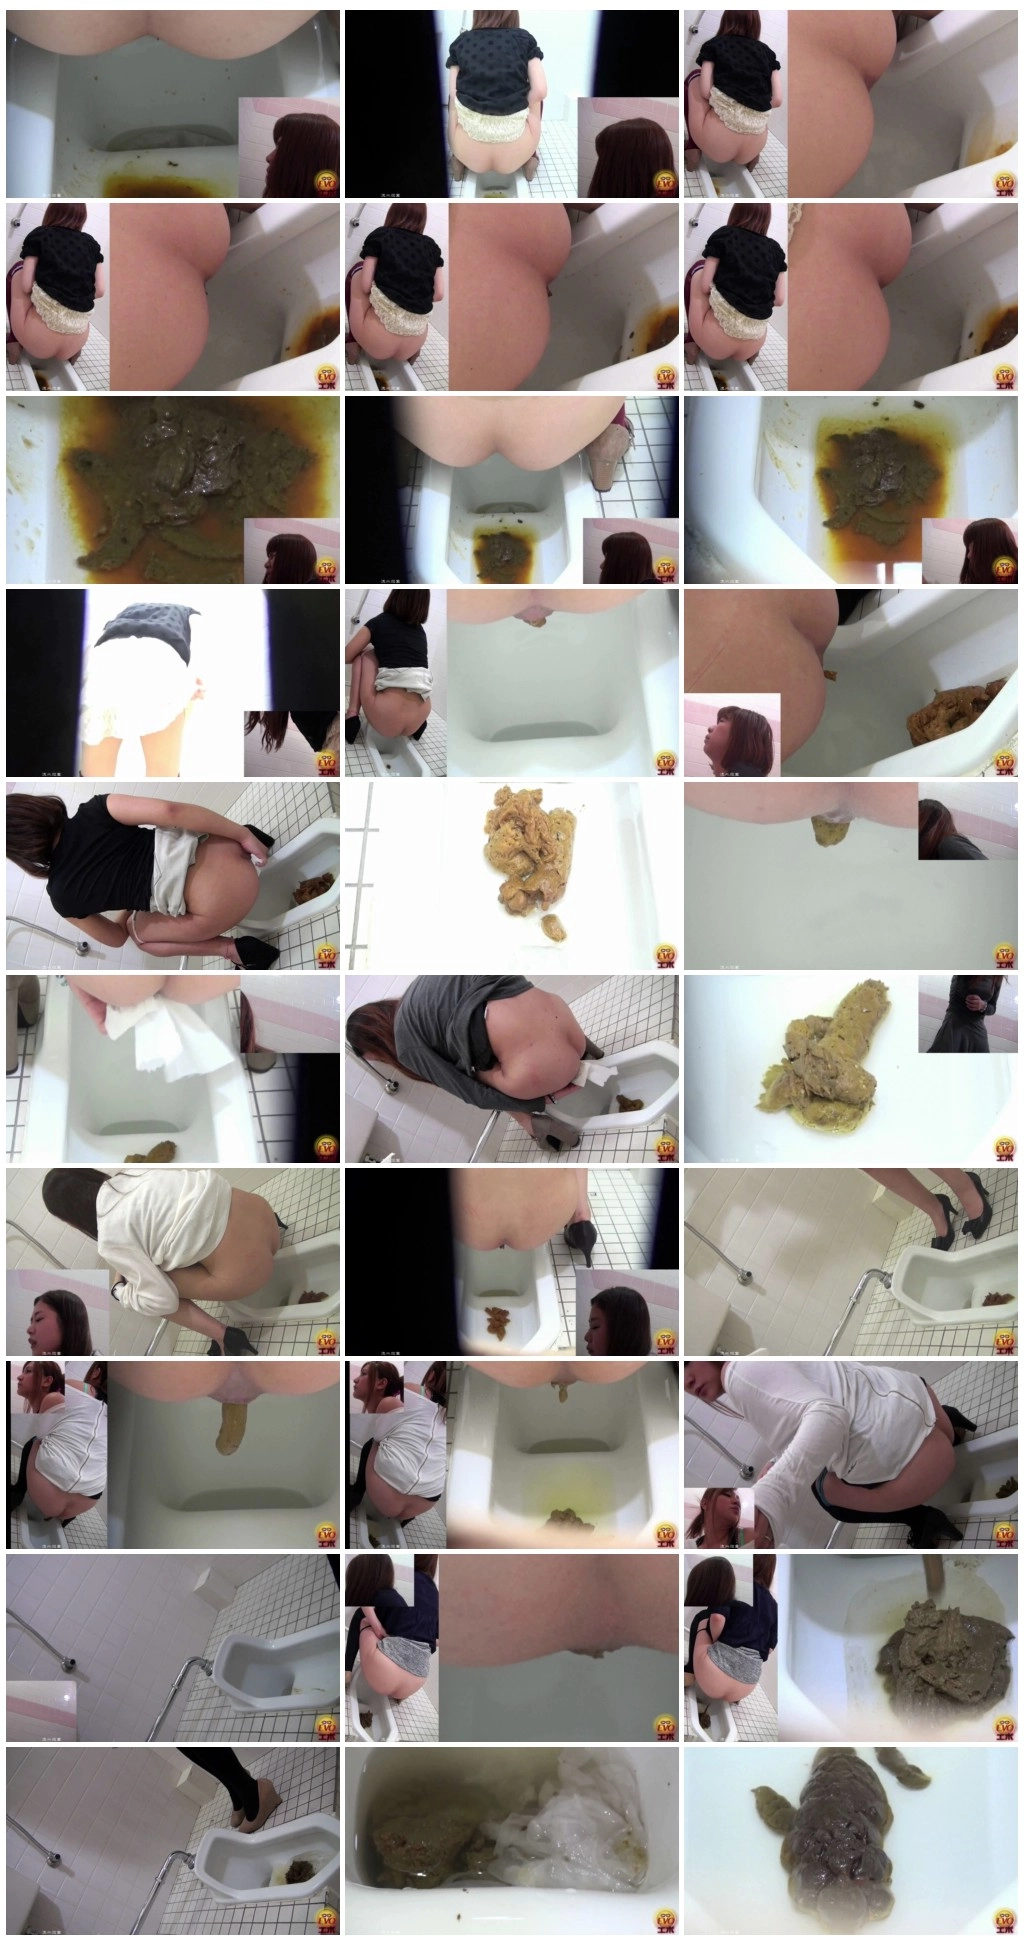 EE-063-02The Hand Made Scat [Scat solo, shit, defecation, Pissing, Farting]